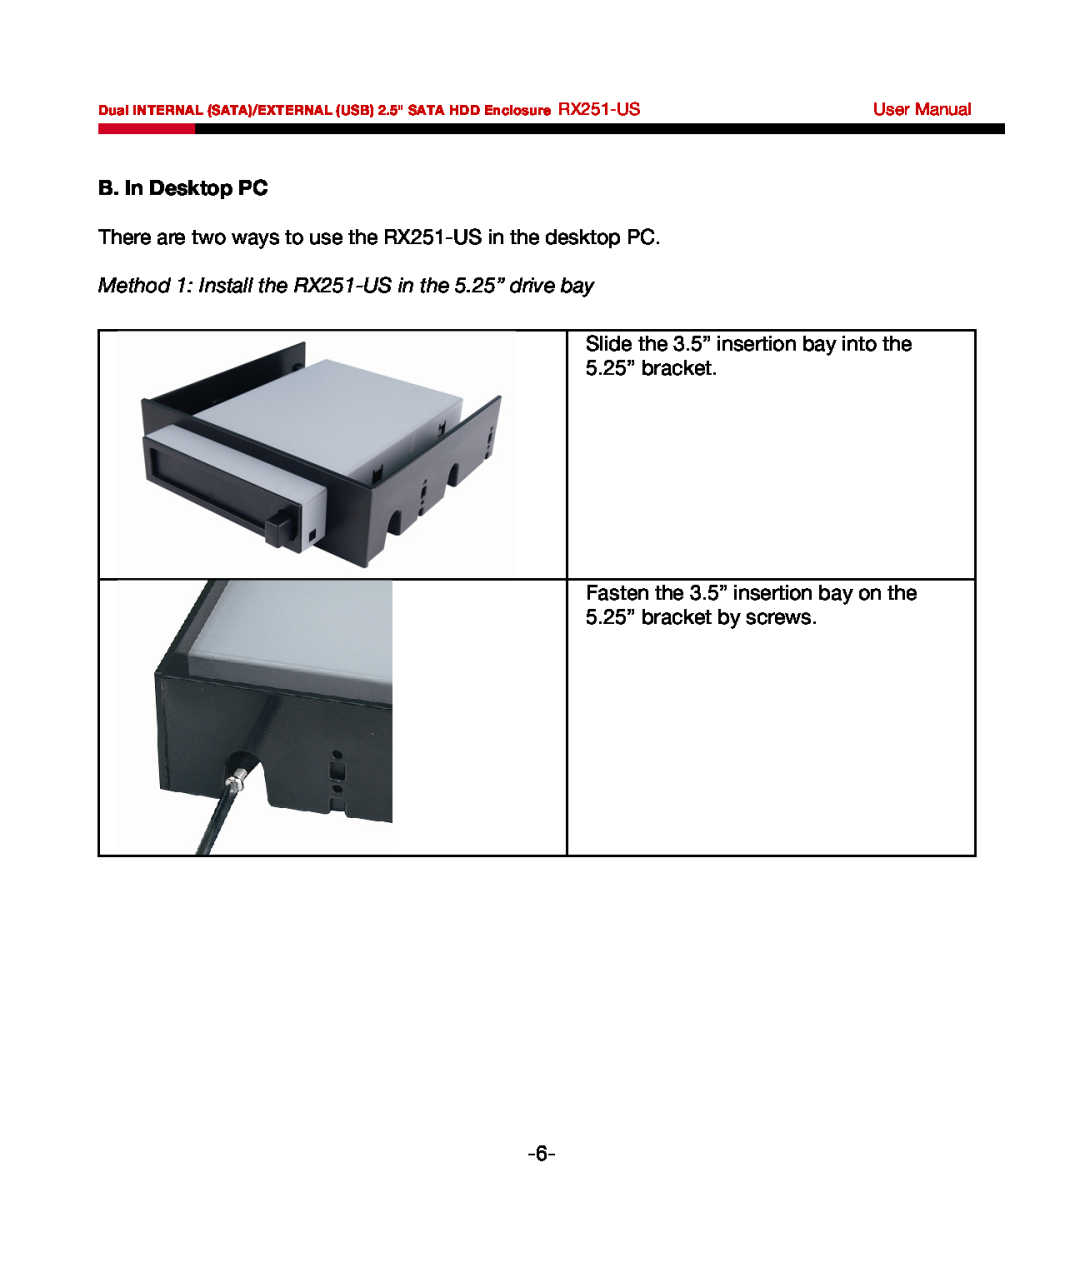 Rosewill user manual B. In Desktop PC, Method 1 Install the RX251-US in the 5.25” drive bay, User Manual 